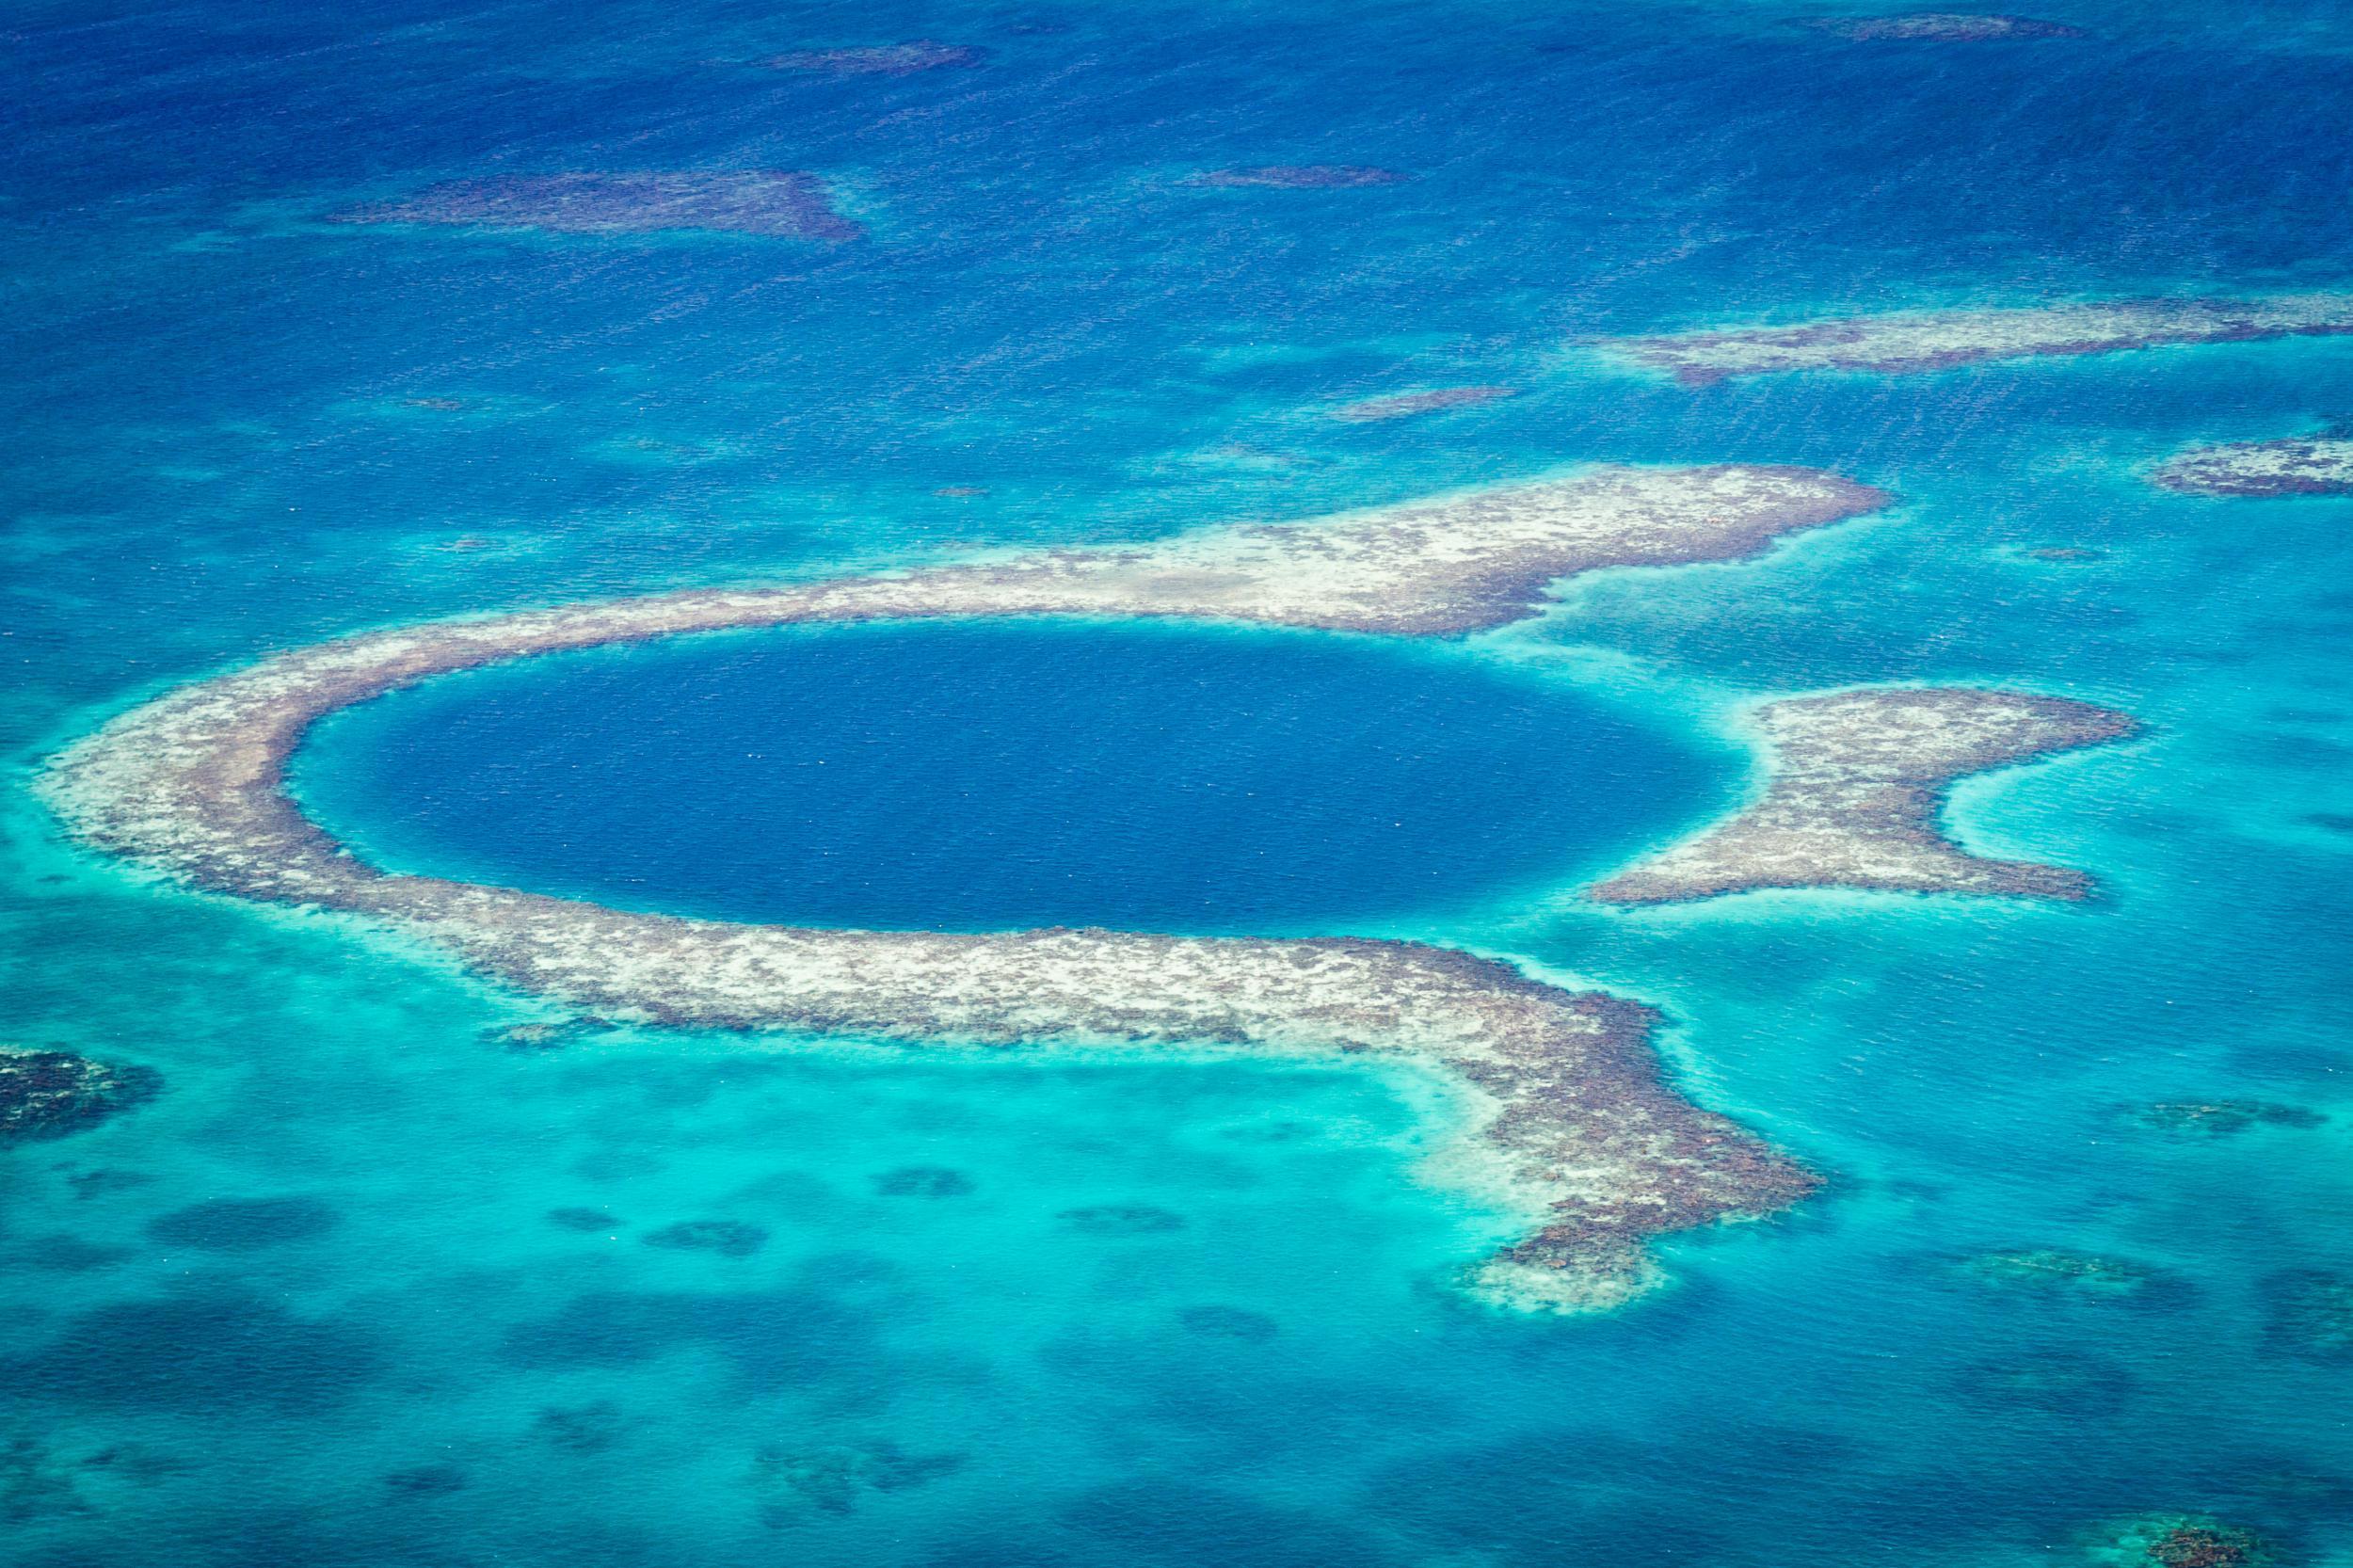 An aerial view of the Great Blue Hole off the coast of Belize